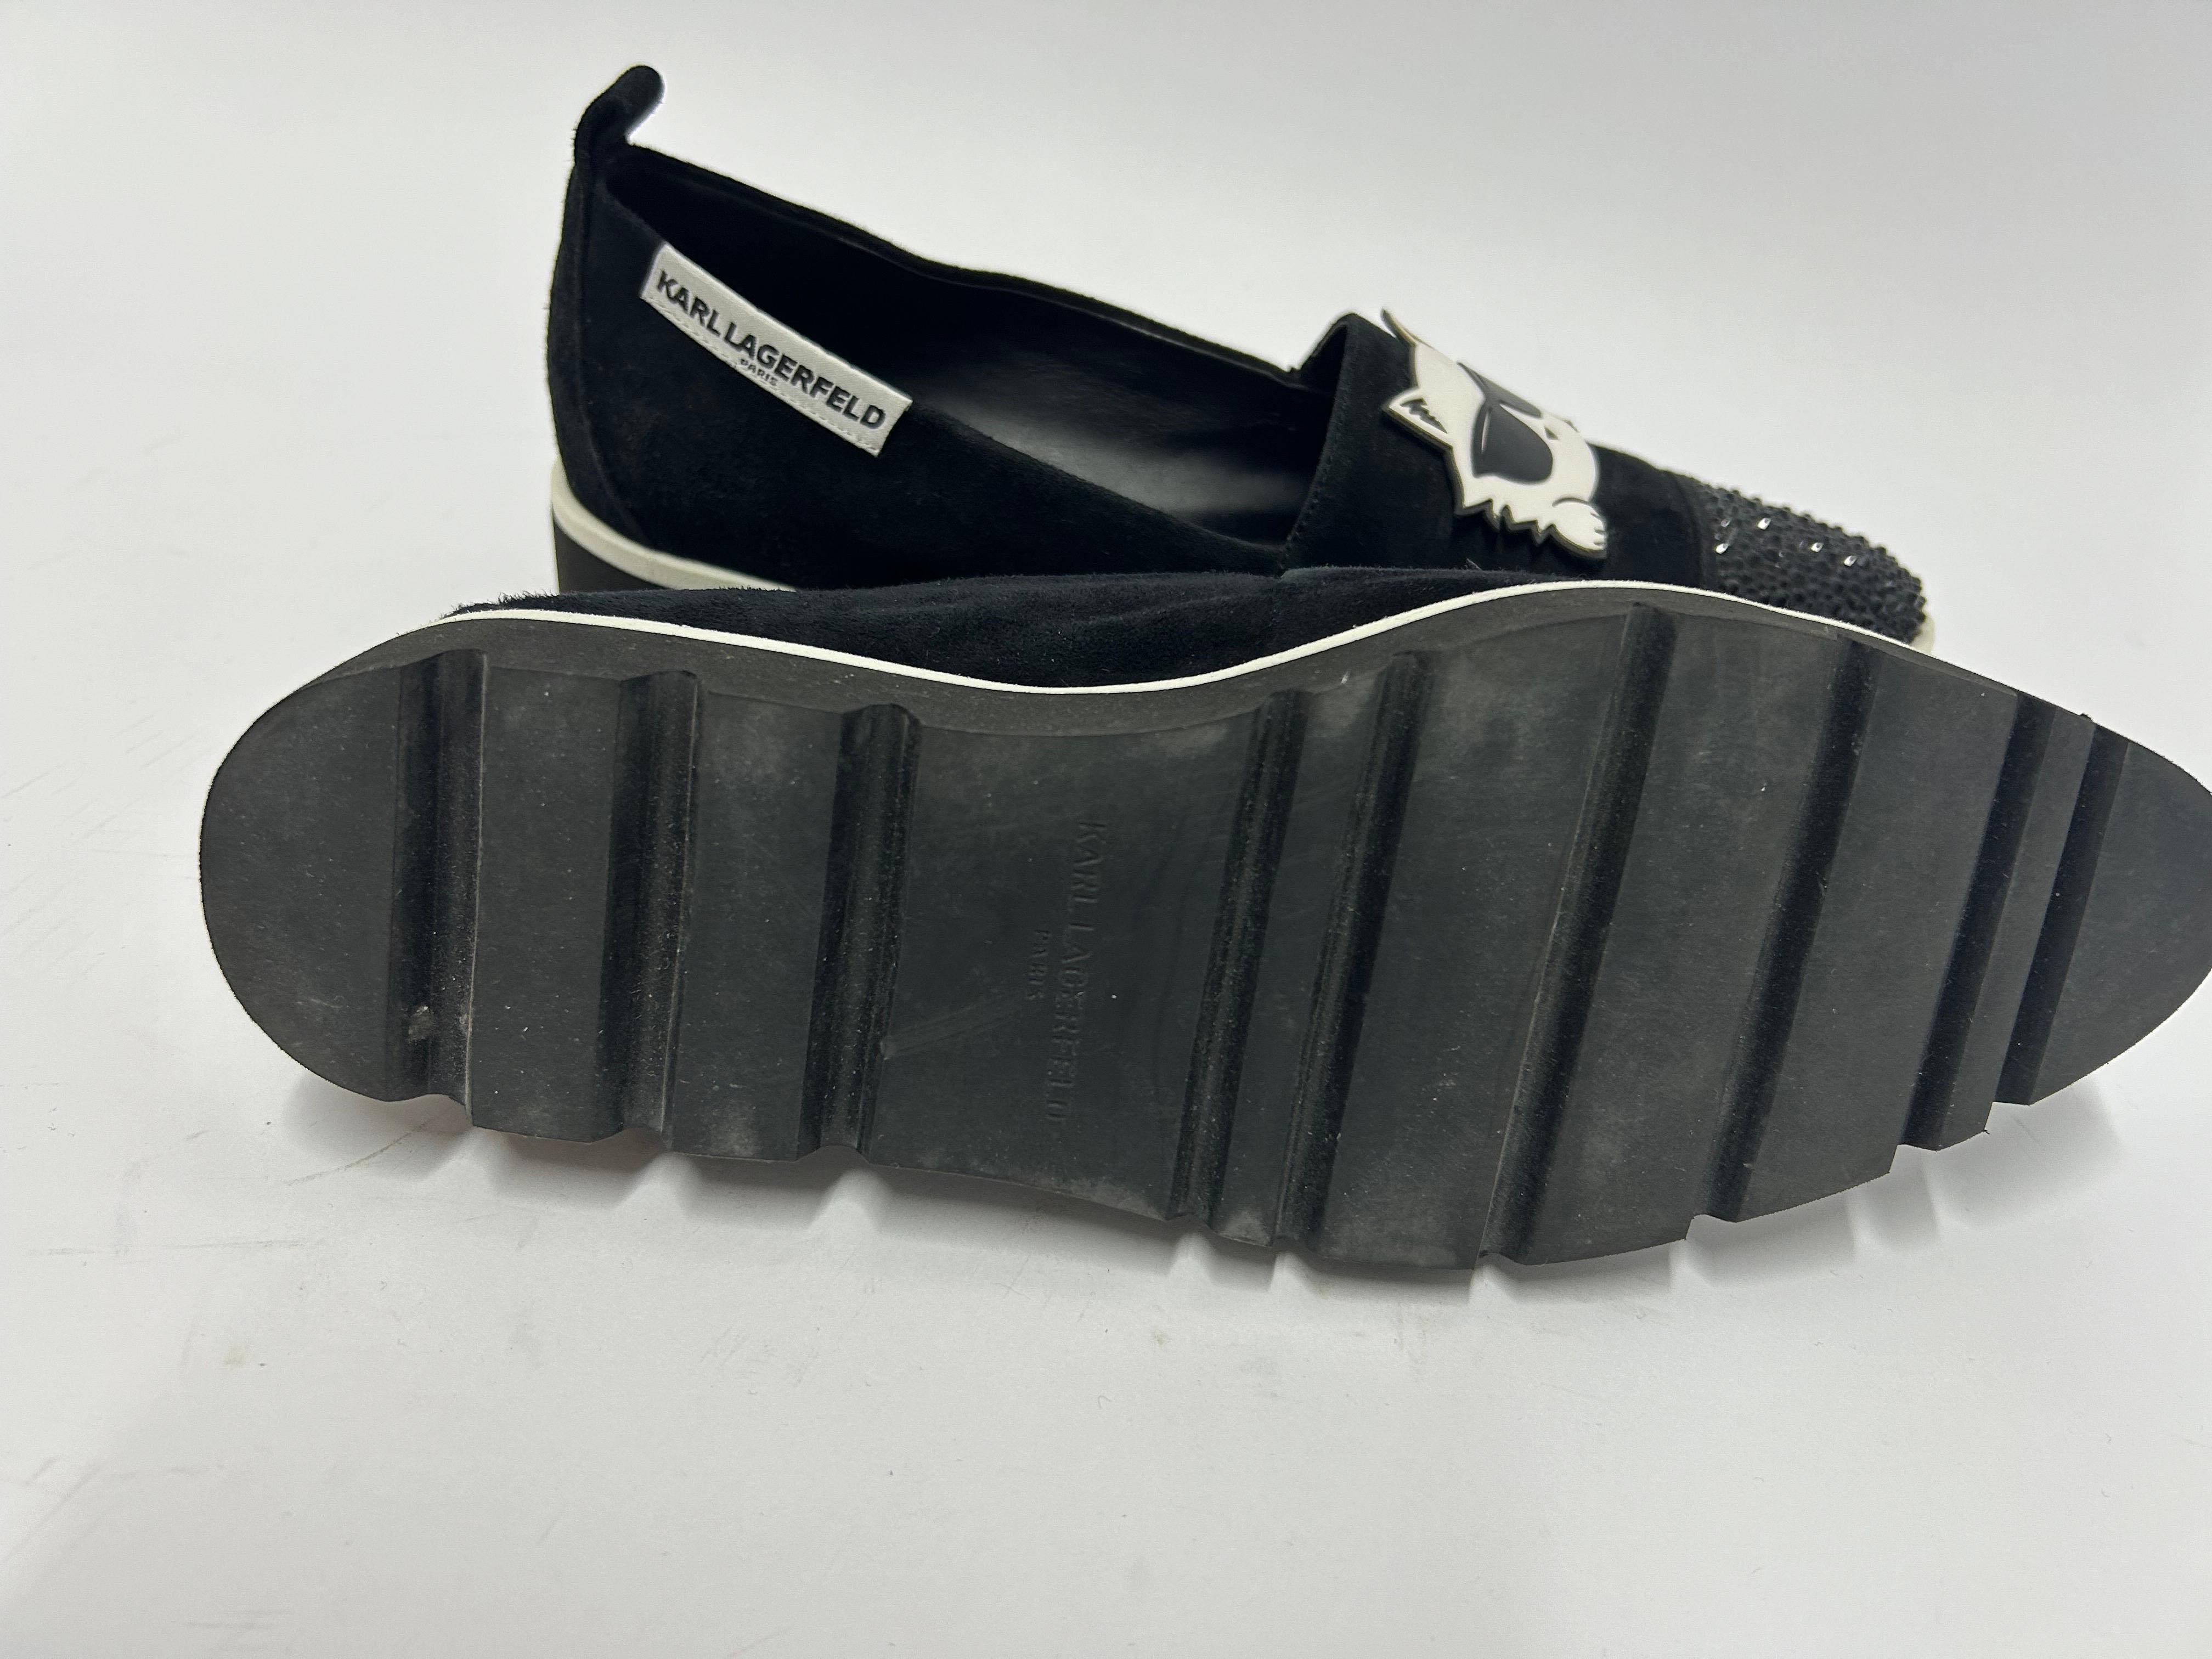 Karl Lagerfeld Paris Carma Sneakers Size US 7.5 For Sale 5